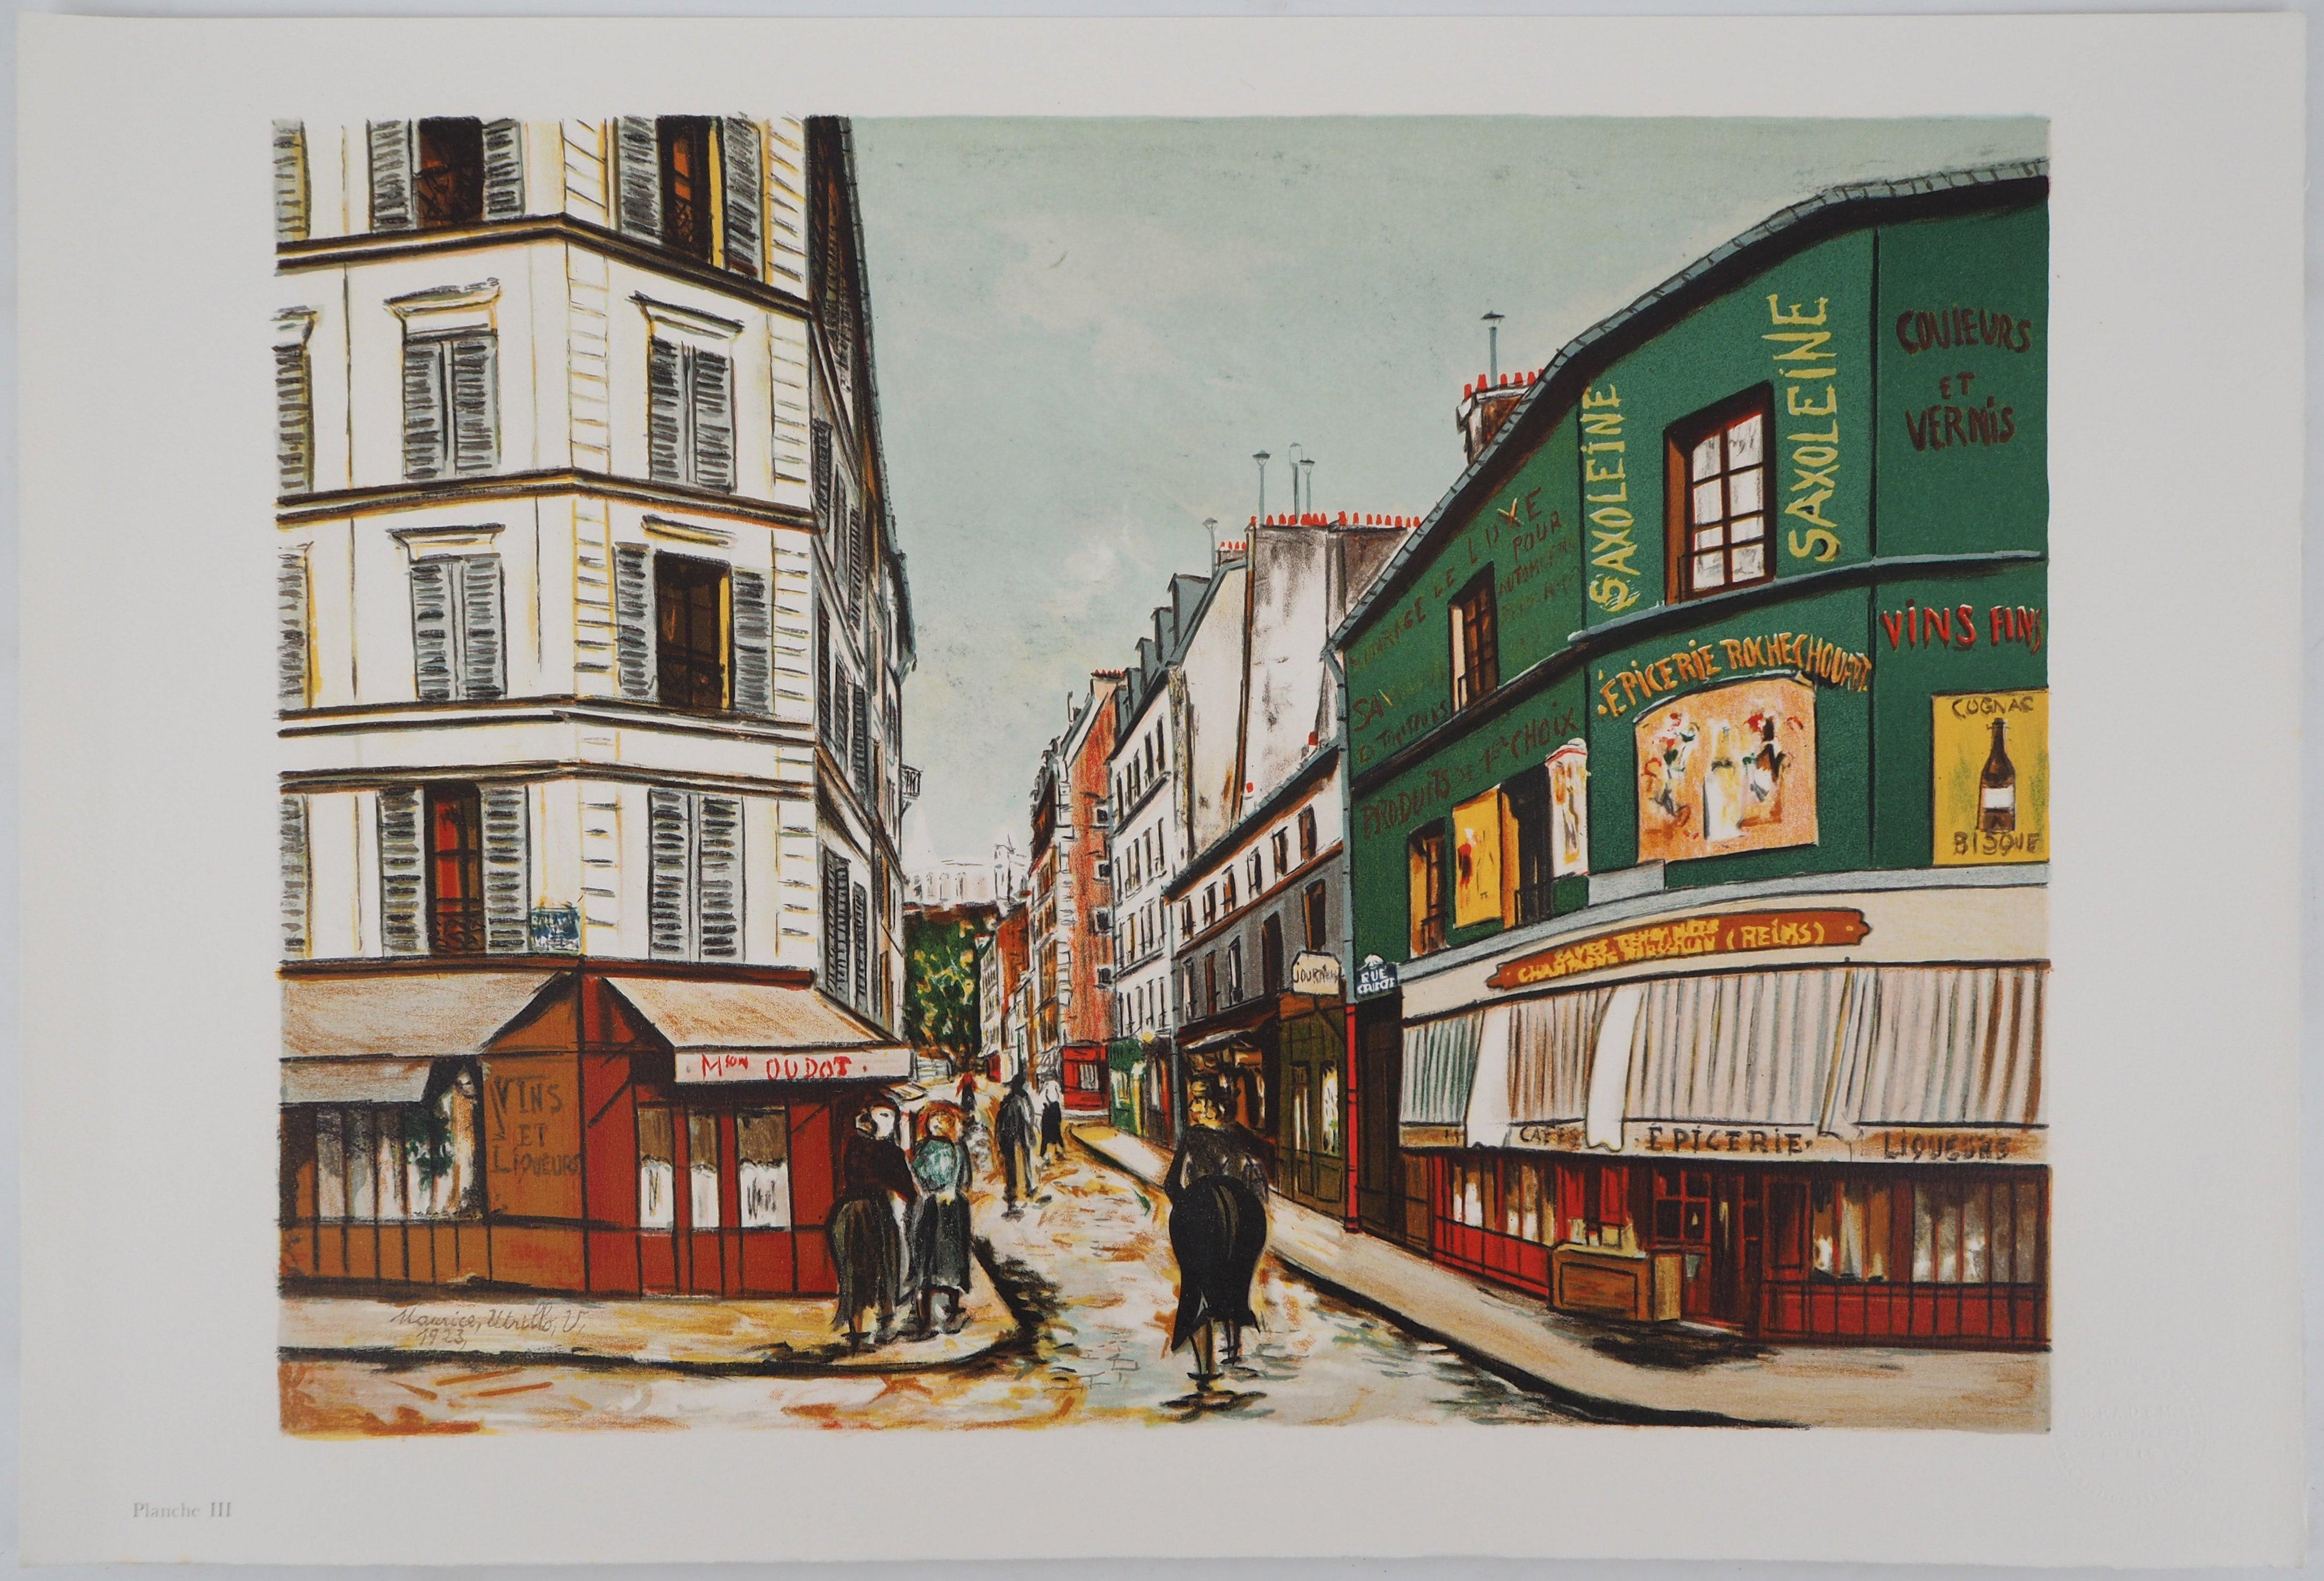 Seveste Street of Montmartre - Lithograph